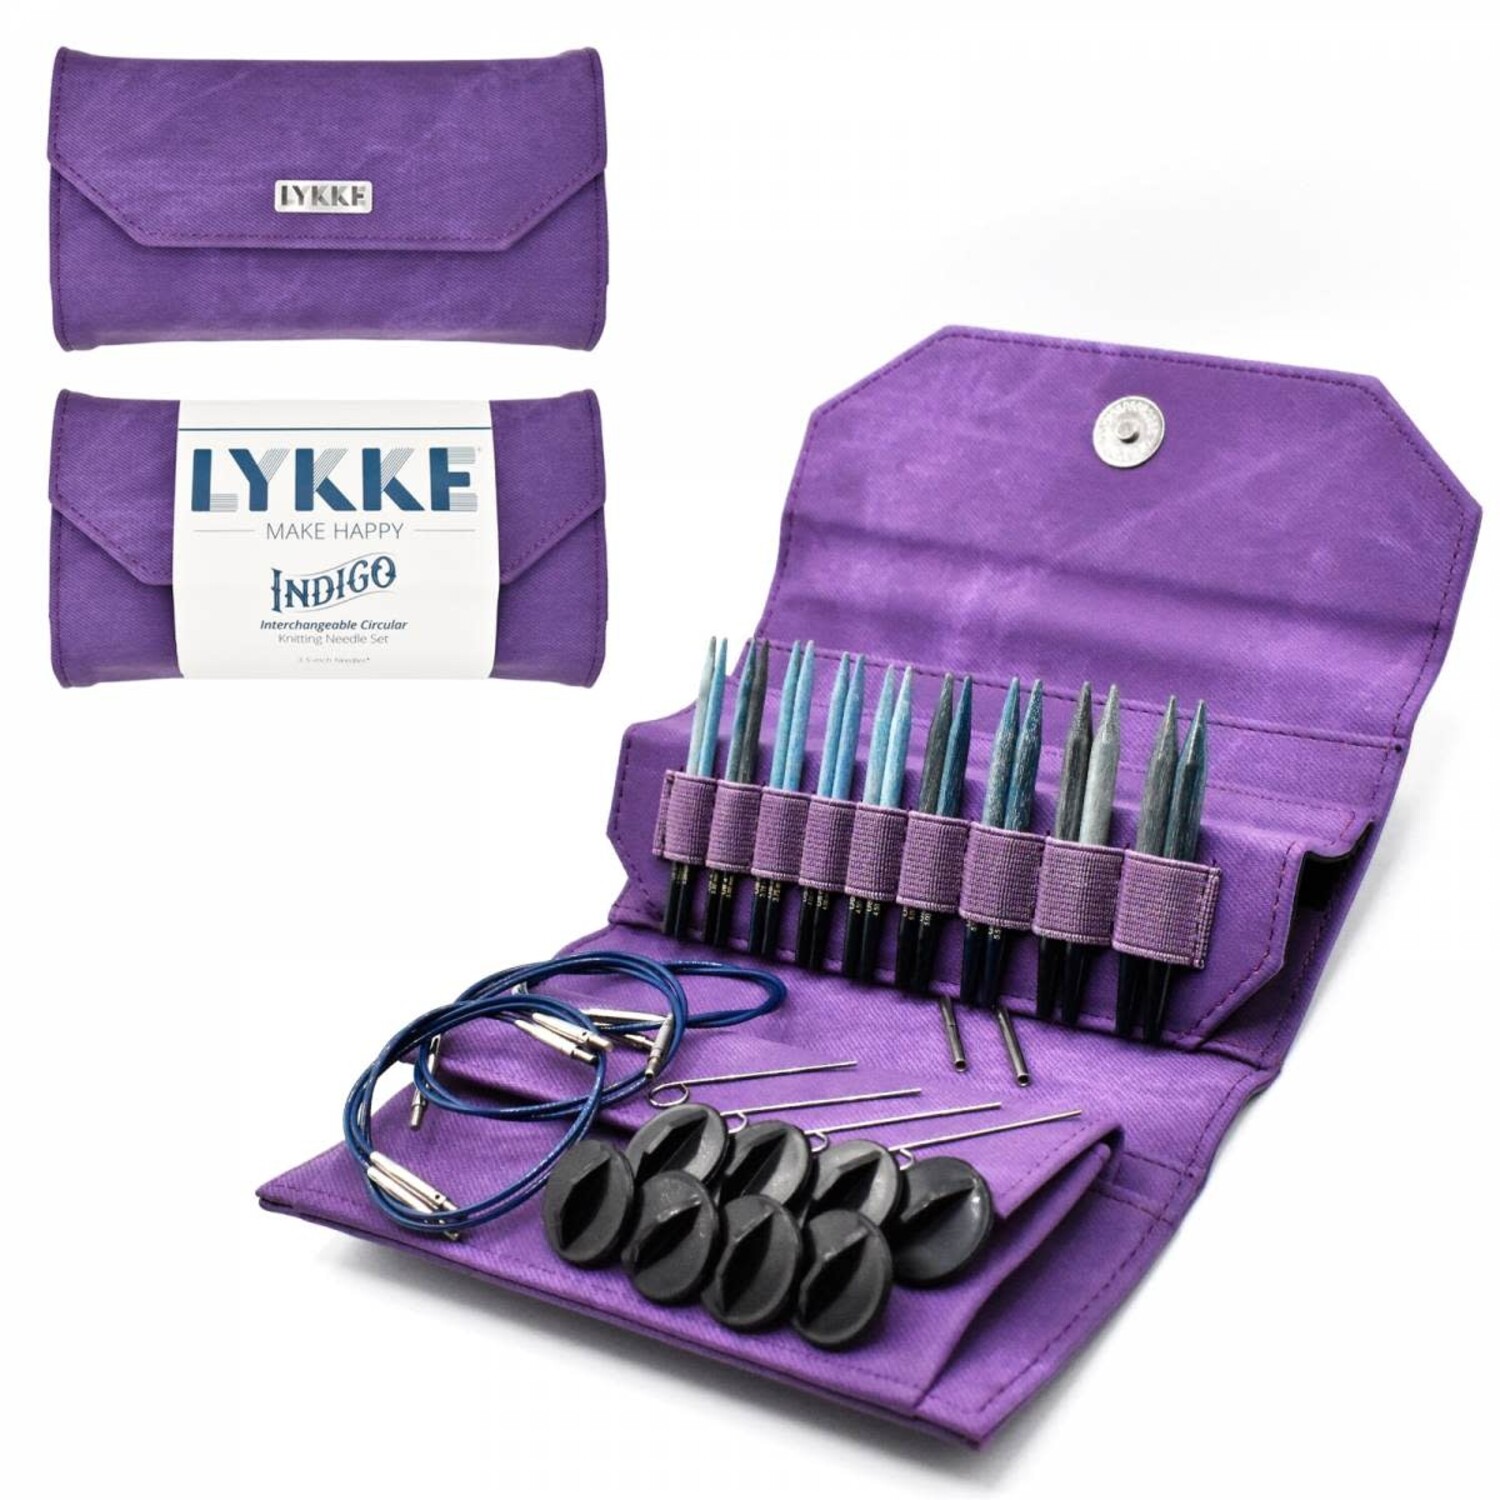 Needle & Hook Sets - Sealed with a Kiss